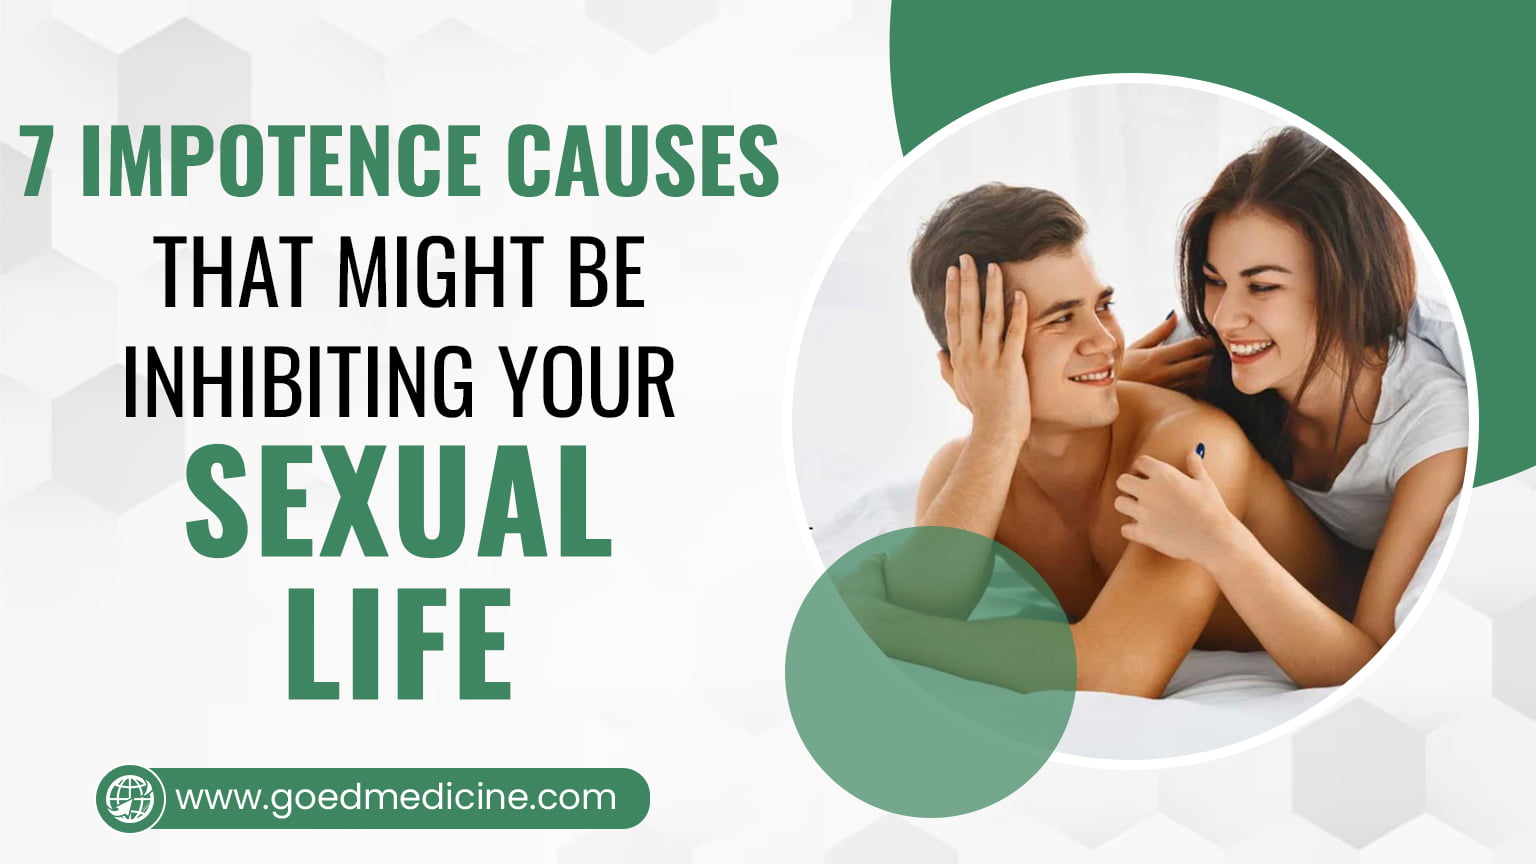 7 Impotence Causes That Might be Inhibiting Your Sexual Life